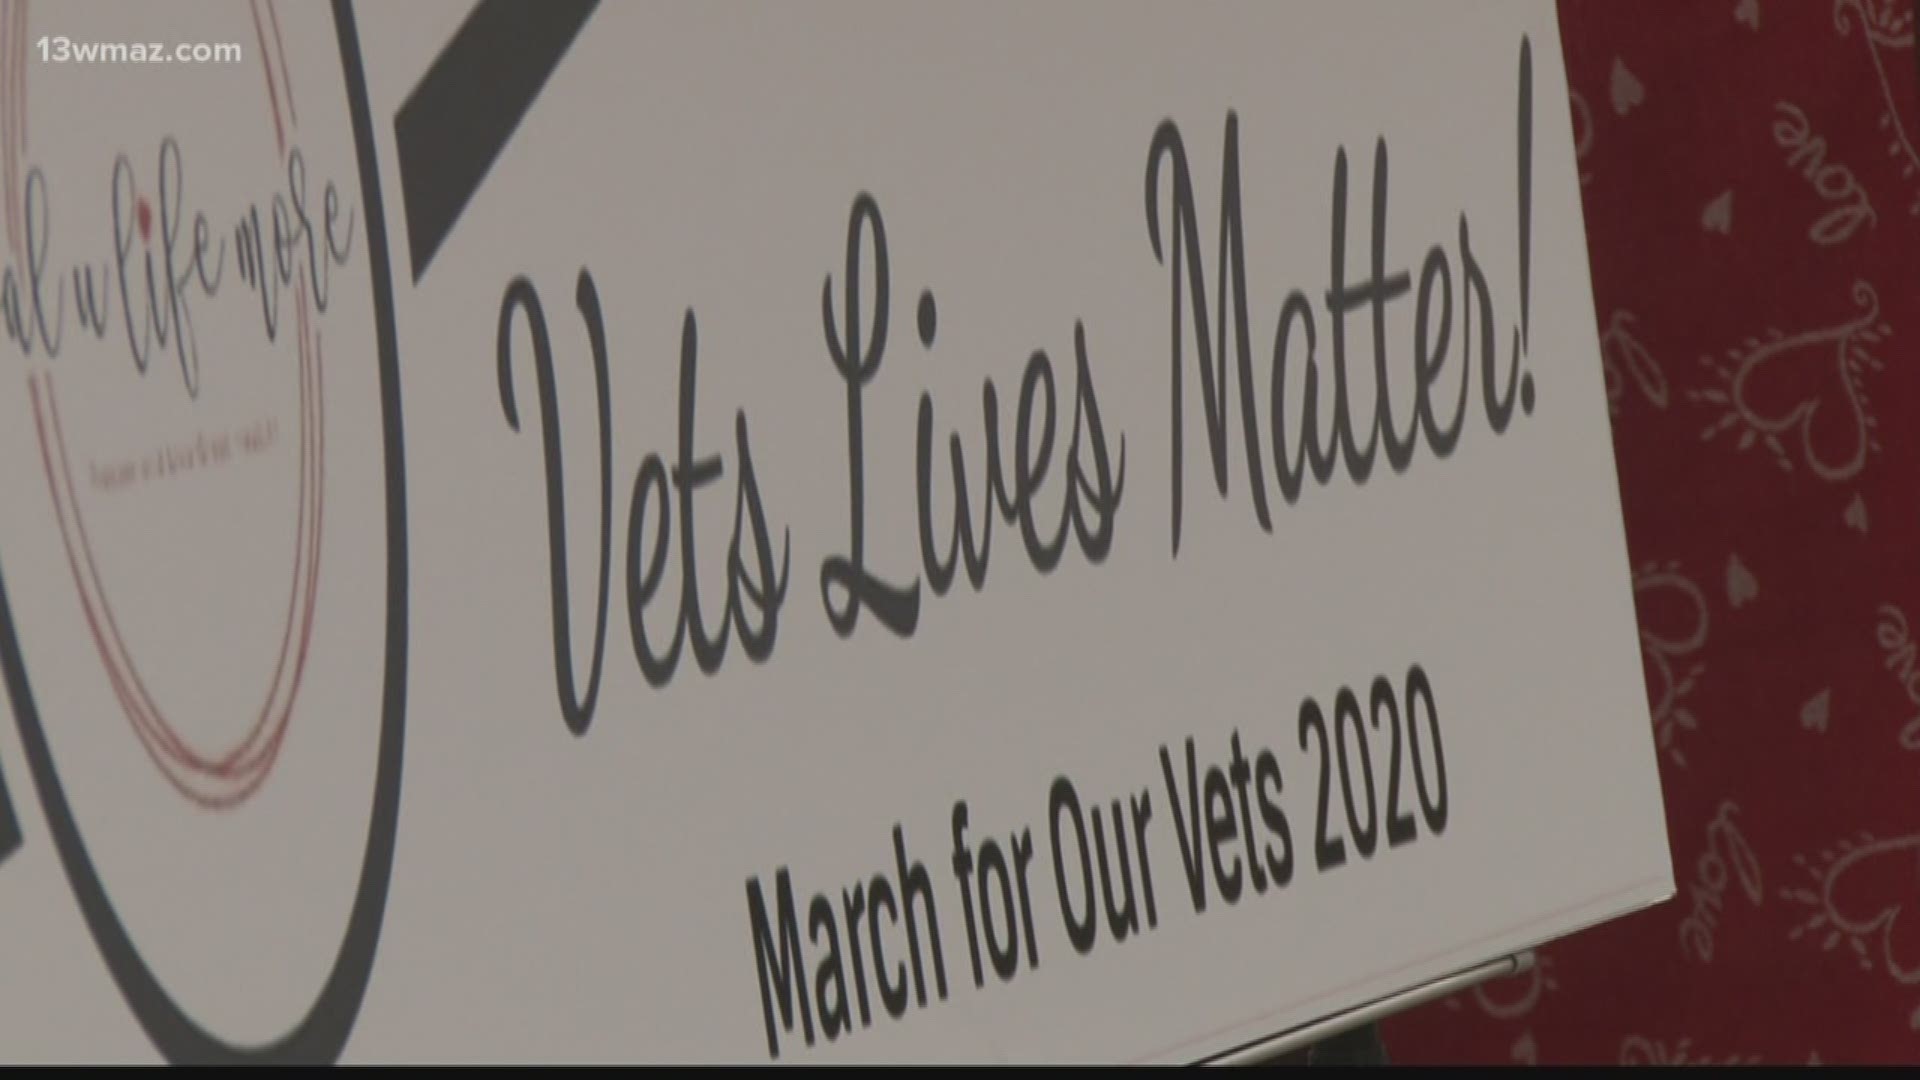 As we honor those who gave their lives on this Memorial Day, one woman is taking steps to ensure those who returned from war feel honored too. Val McLeod is launching a new nationwide organization called 'Vets Lives Matter' to help connect vets to mental health resources.